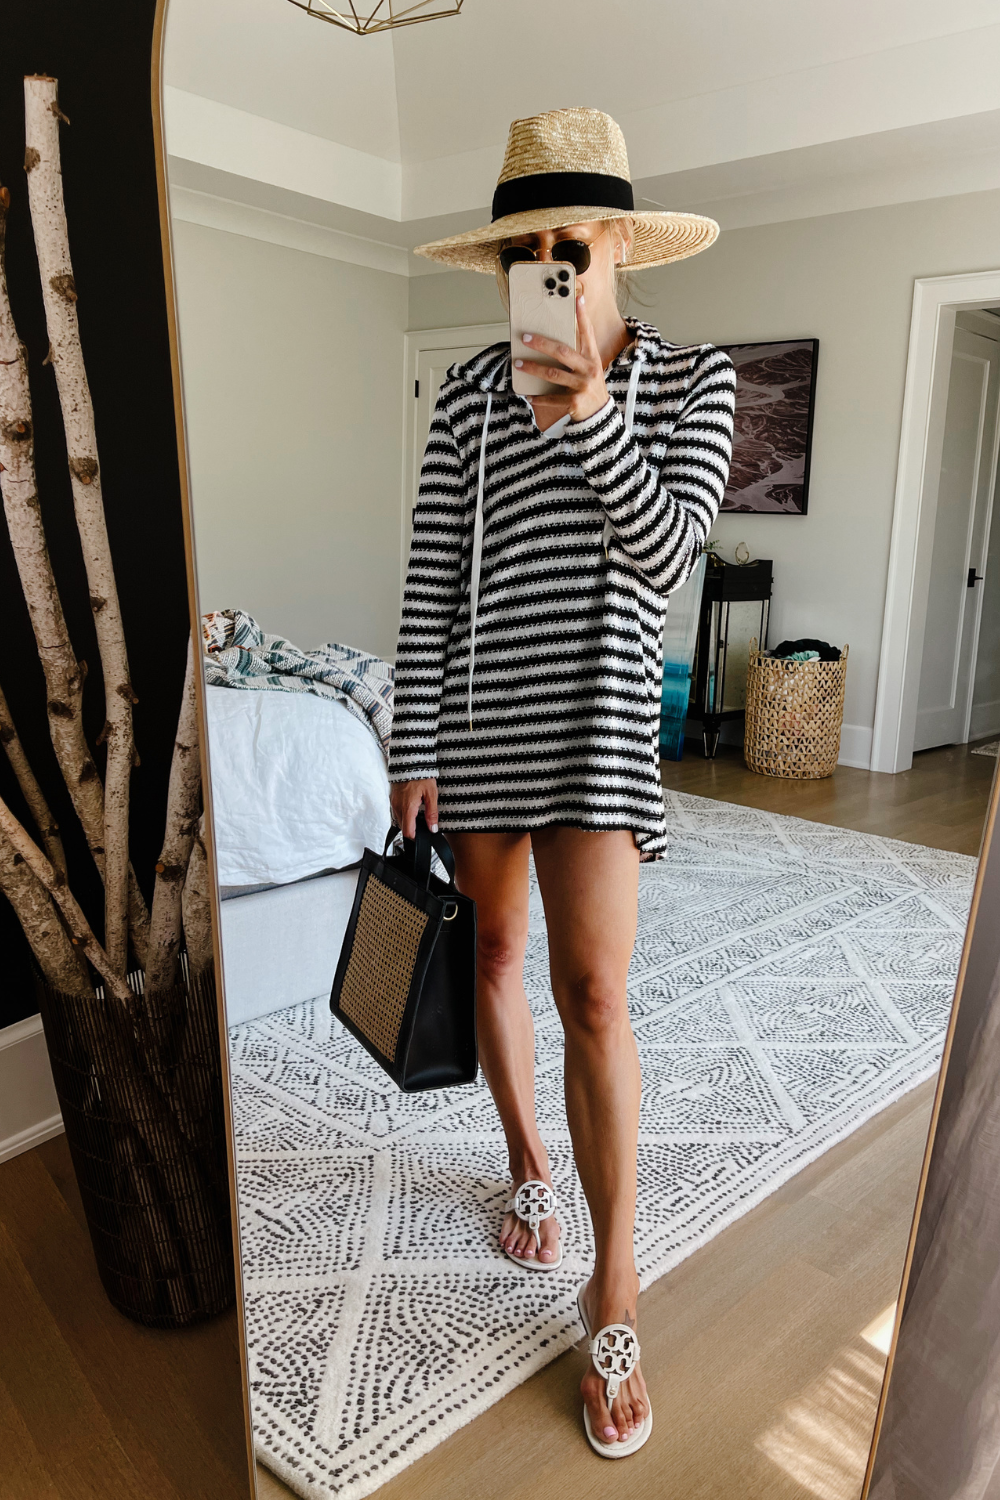 Suzanne taking a mirror selfie in a striped swim cover up, straw hat, wicker bag, and sandals